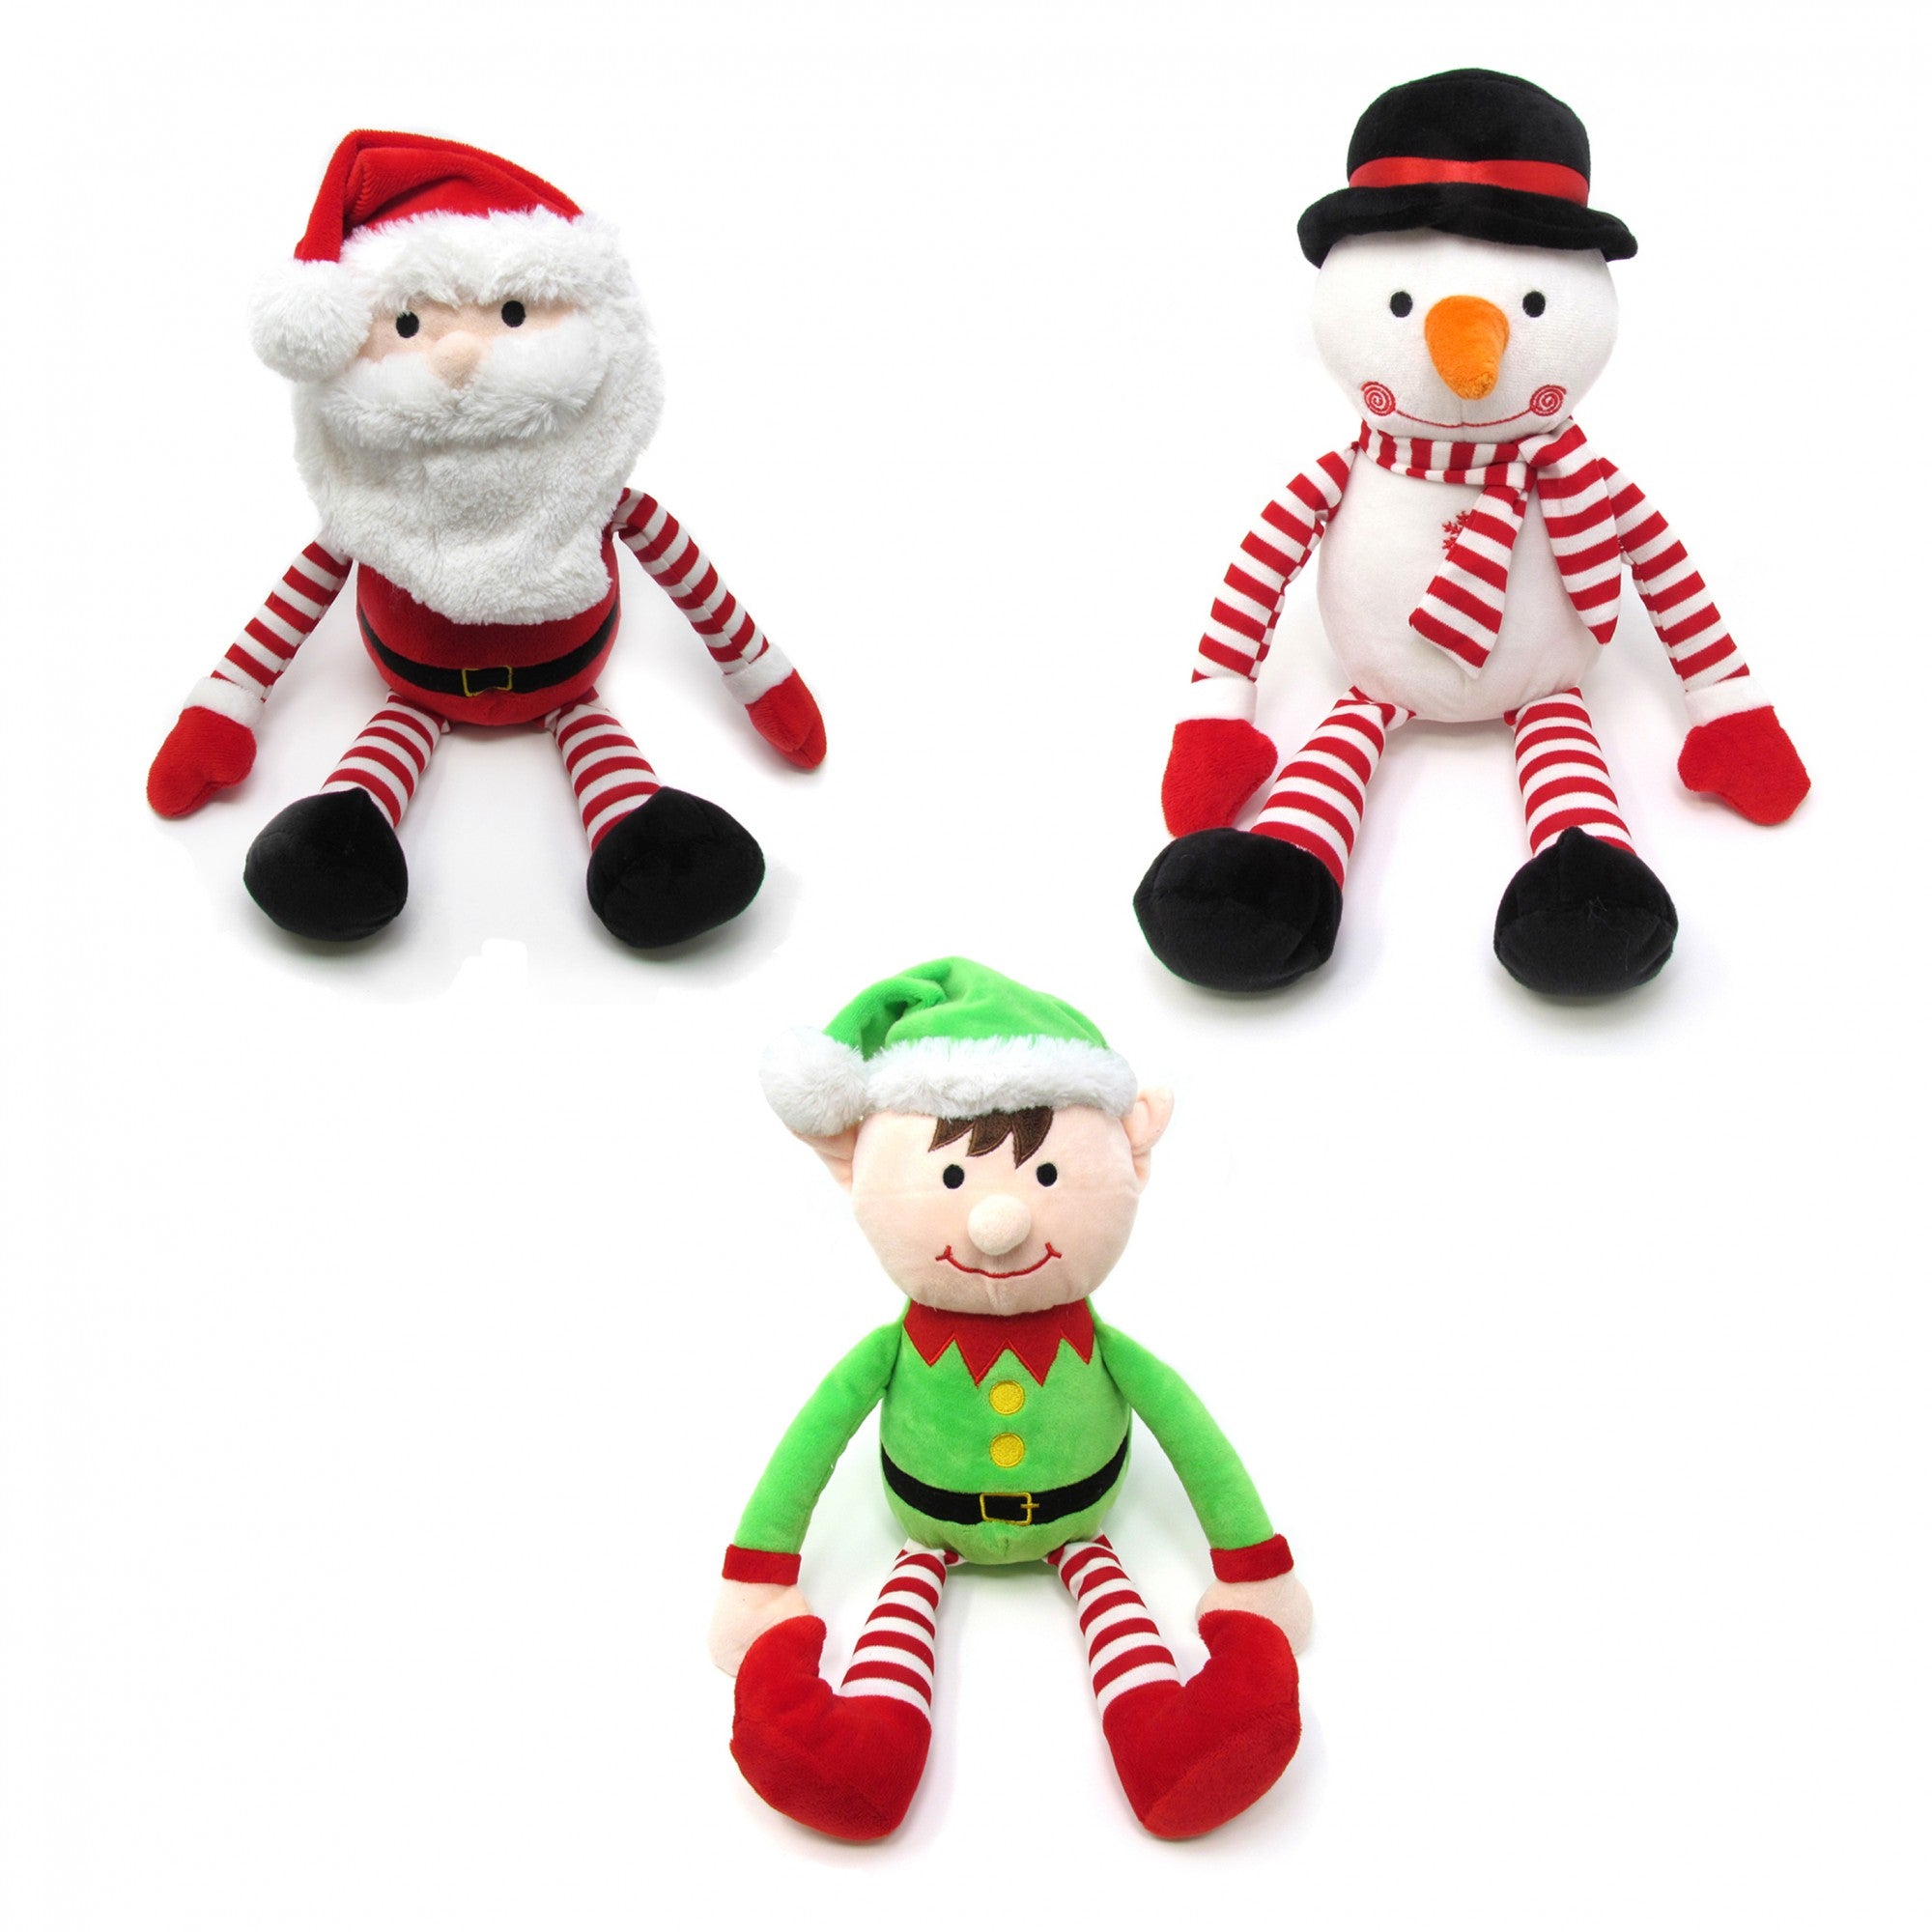 View 10 inch Christmas Sitting Plush Toys assorted design information